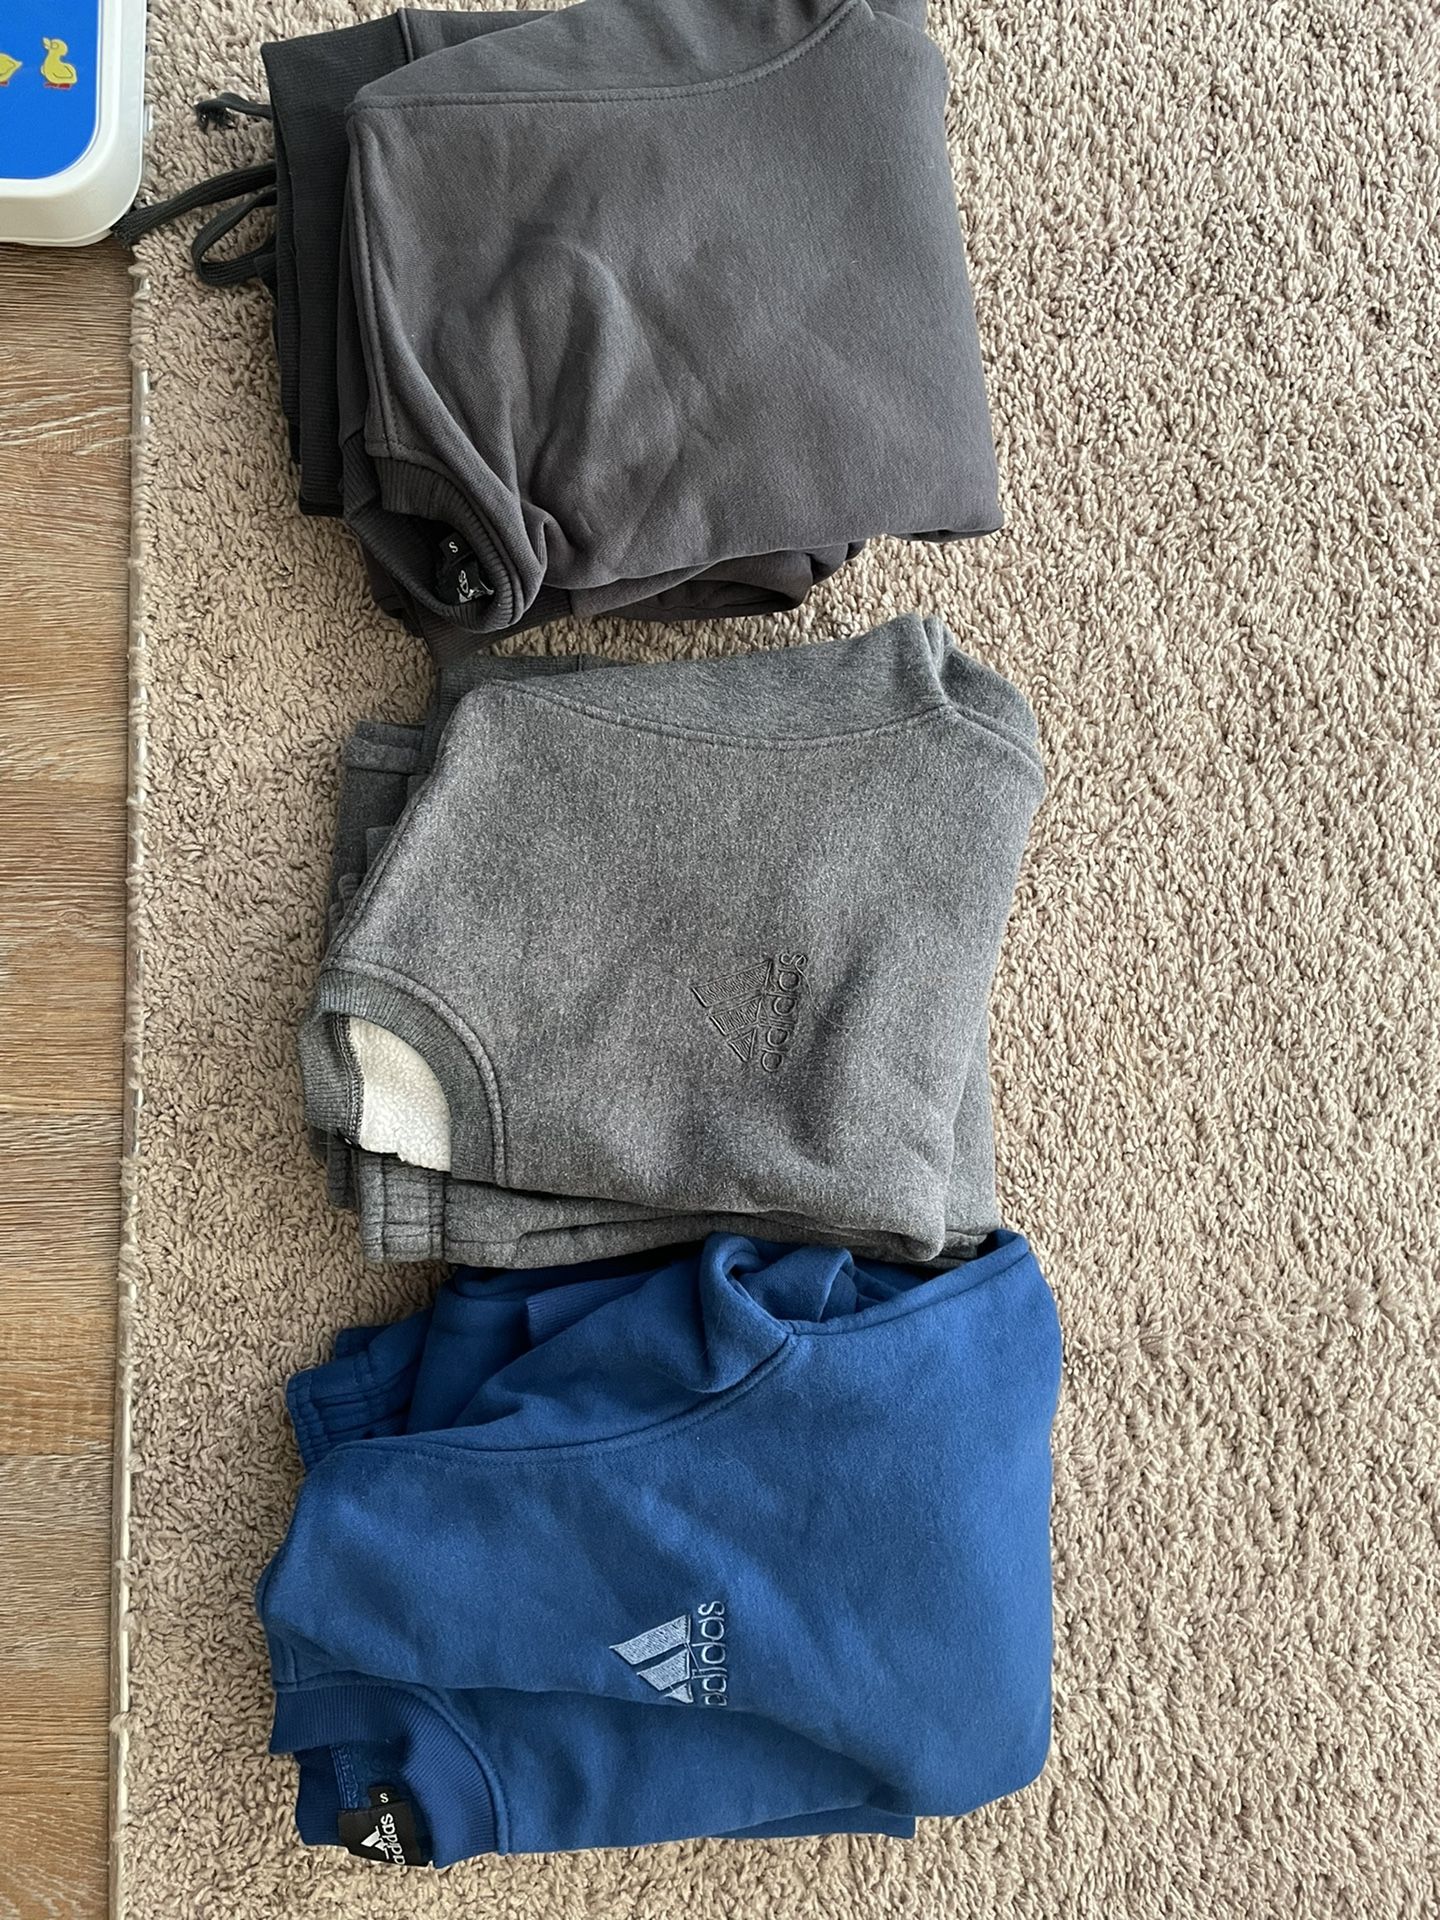 3 Warm Adidas Clothes (Sweater + Pants)